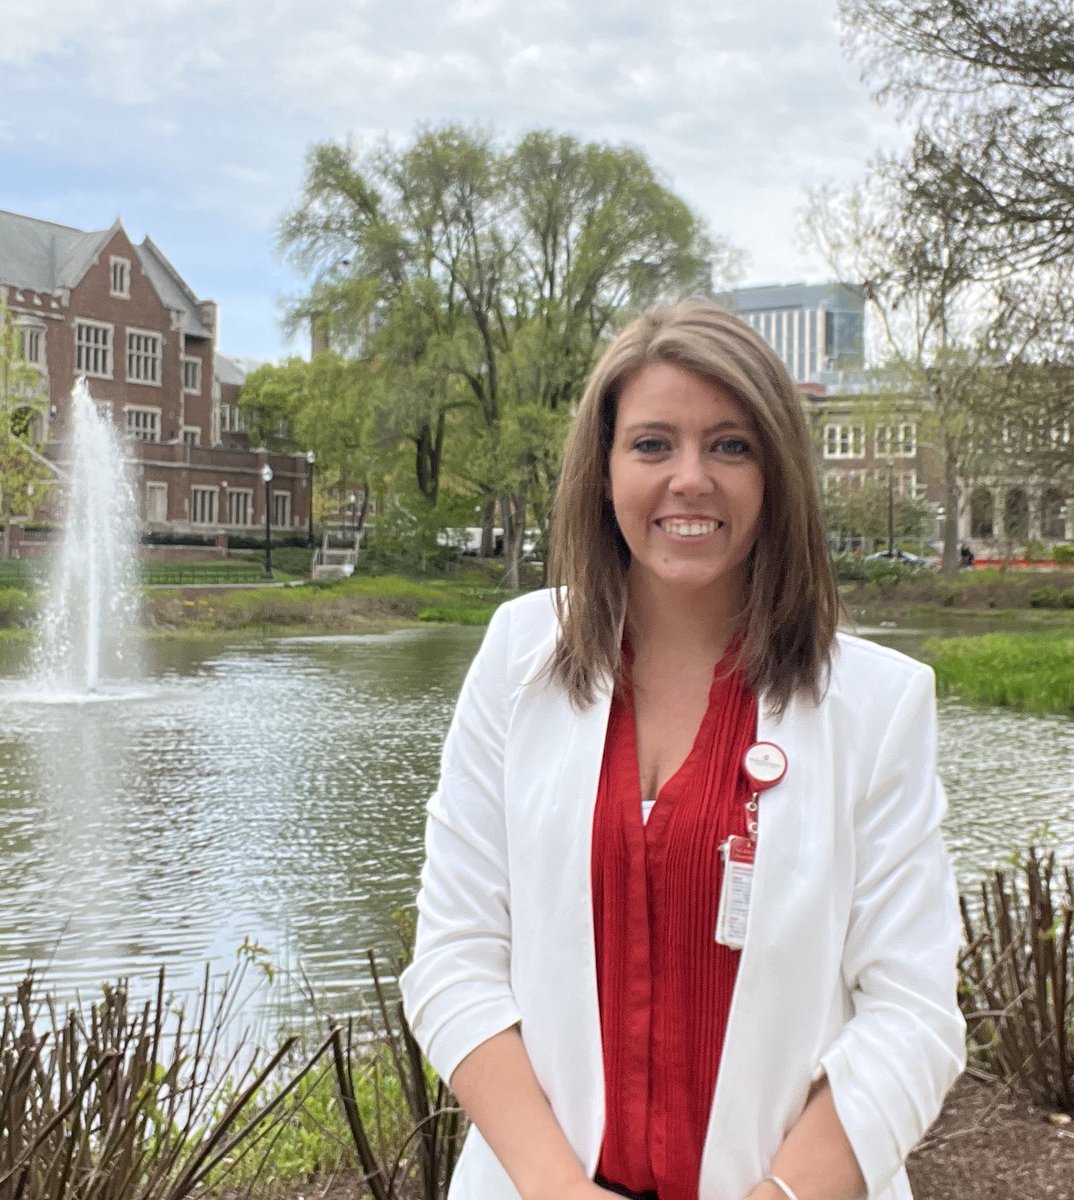 #NewProfiIePic after 3.5 years at Ohio State - I finally got my professional photo! Feeling such gratitude to be working at Ohio State 🌰❤️#dreamjob